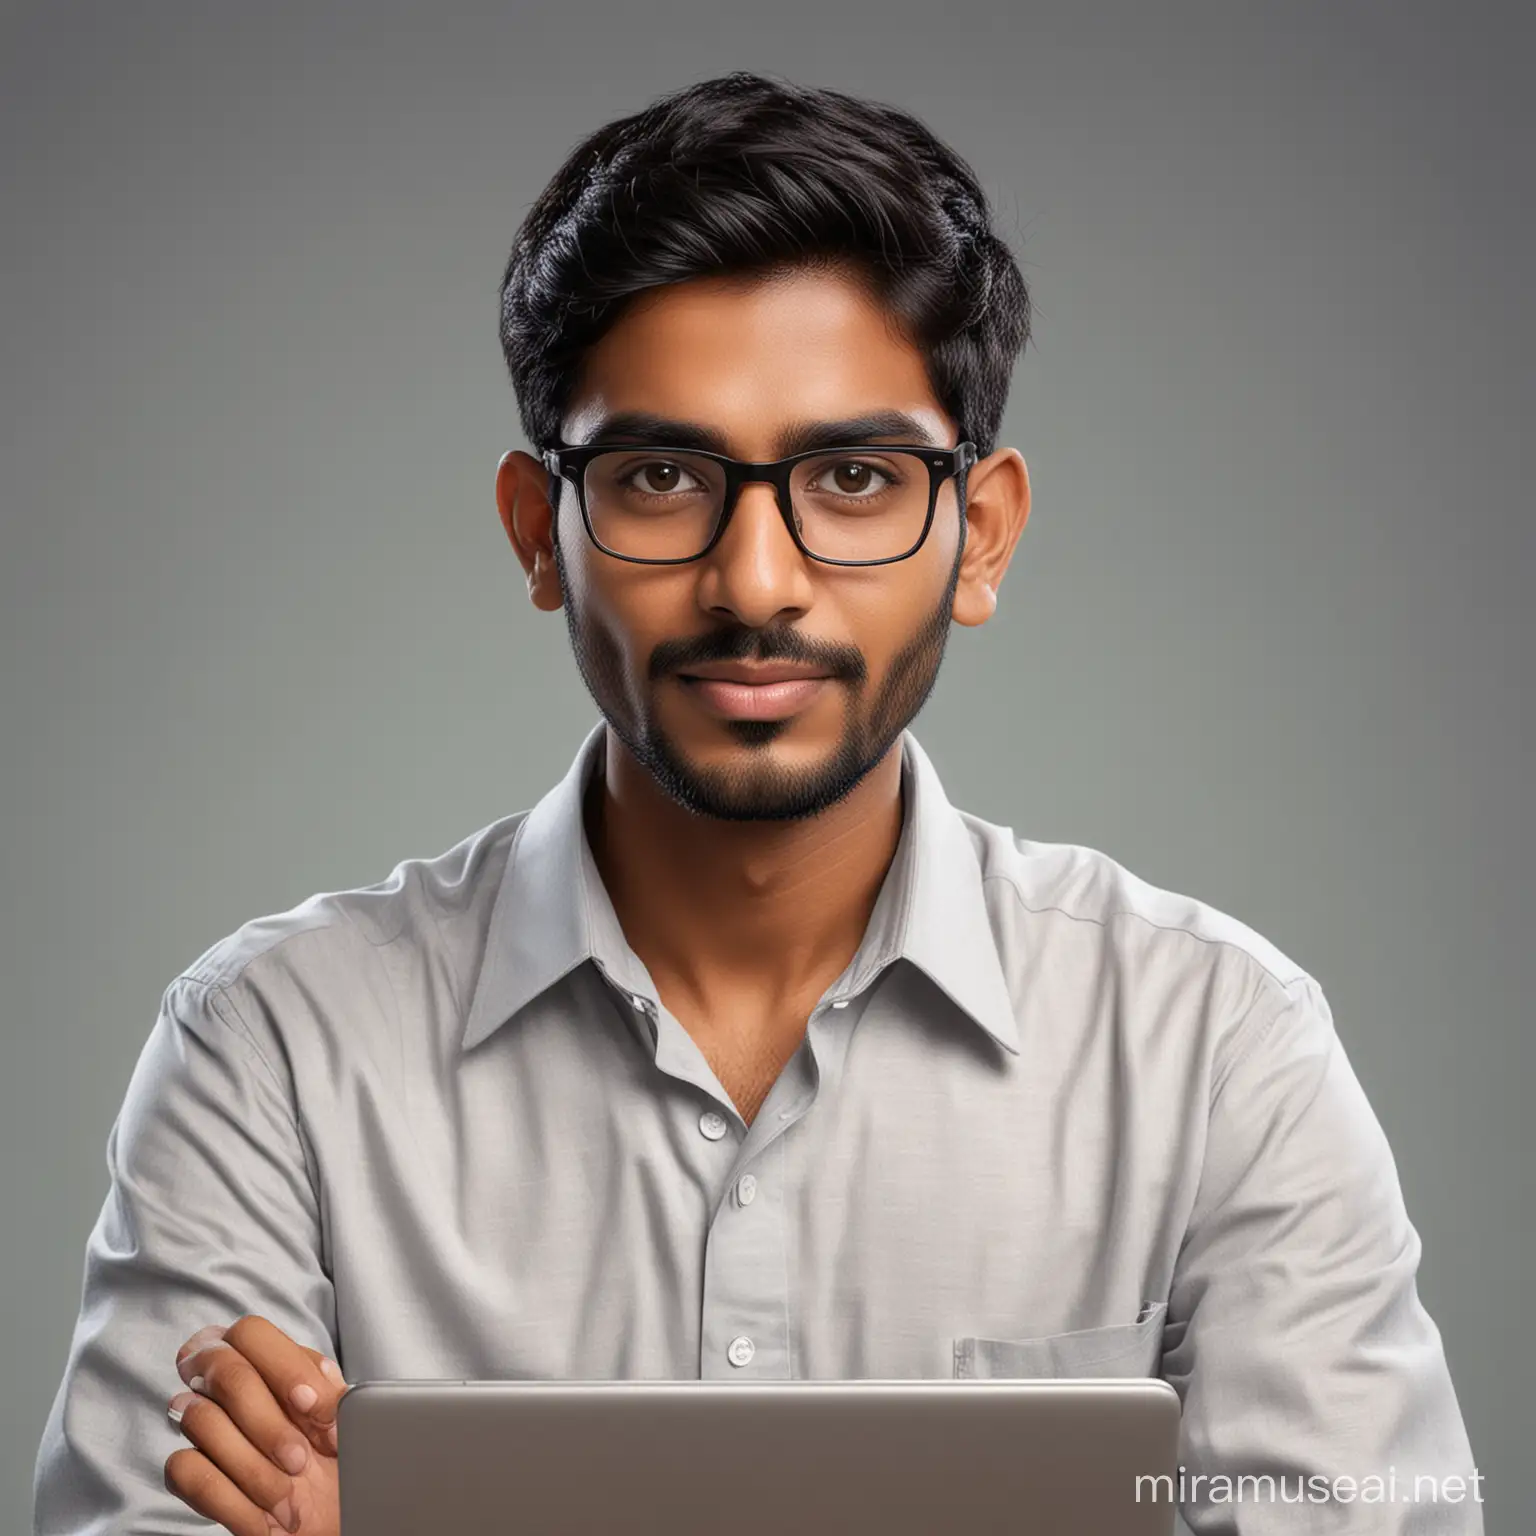 Realistic profile picture of an Indian man who is in his youth age and tech savvy